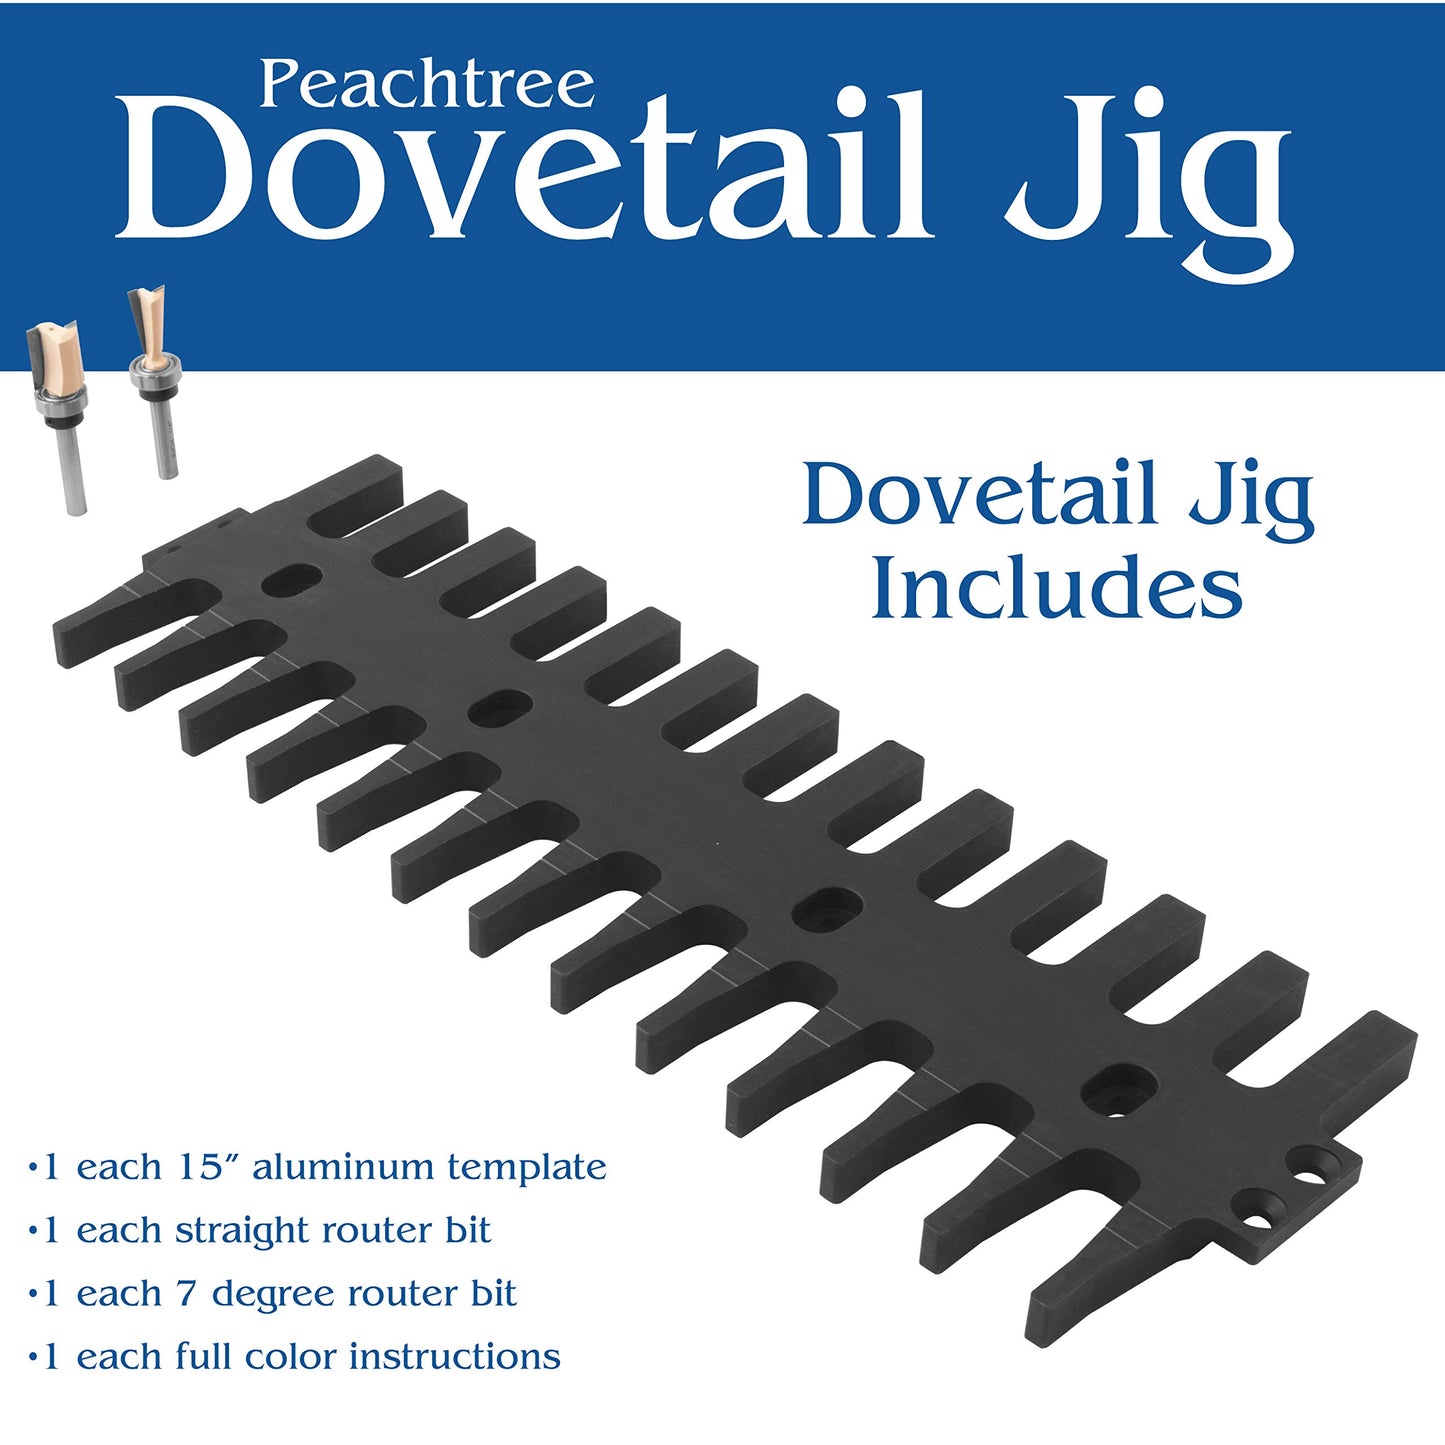 Peachtree Dovetail Jig System with One Flush Trim Router Bit One Dovetail Router Bit and Aluminum Jig Template with Full Color Instructions